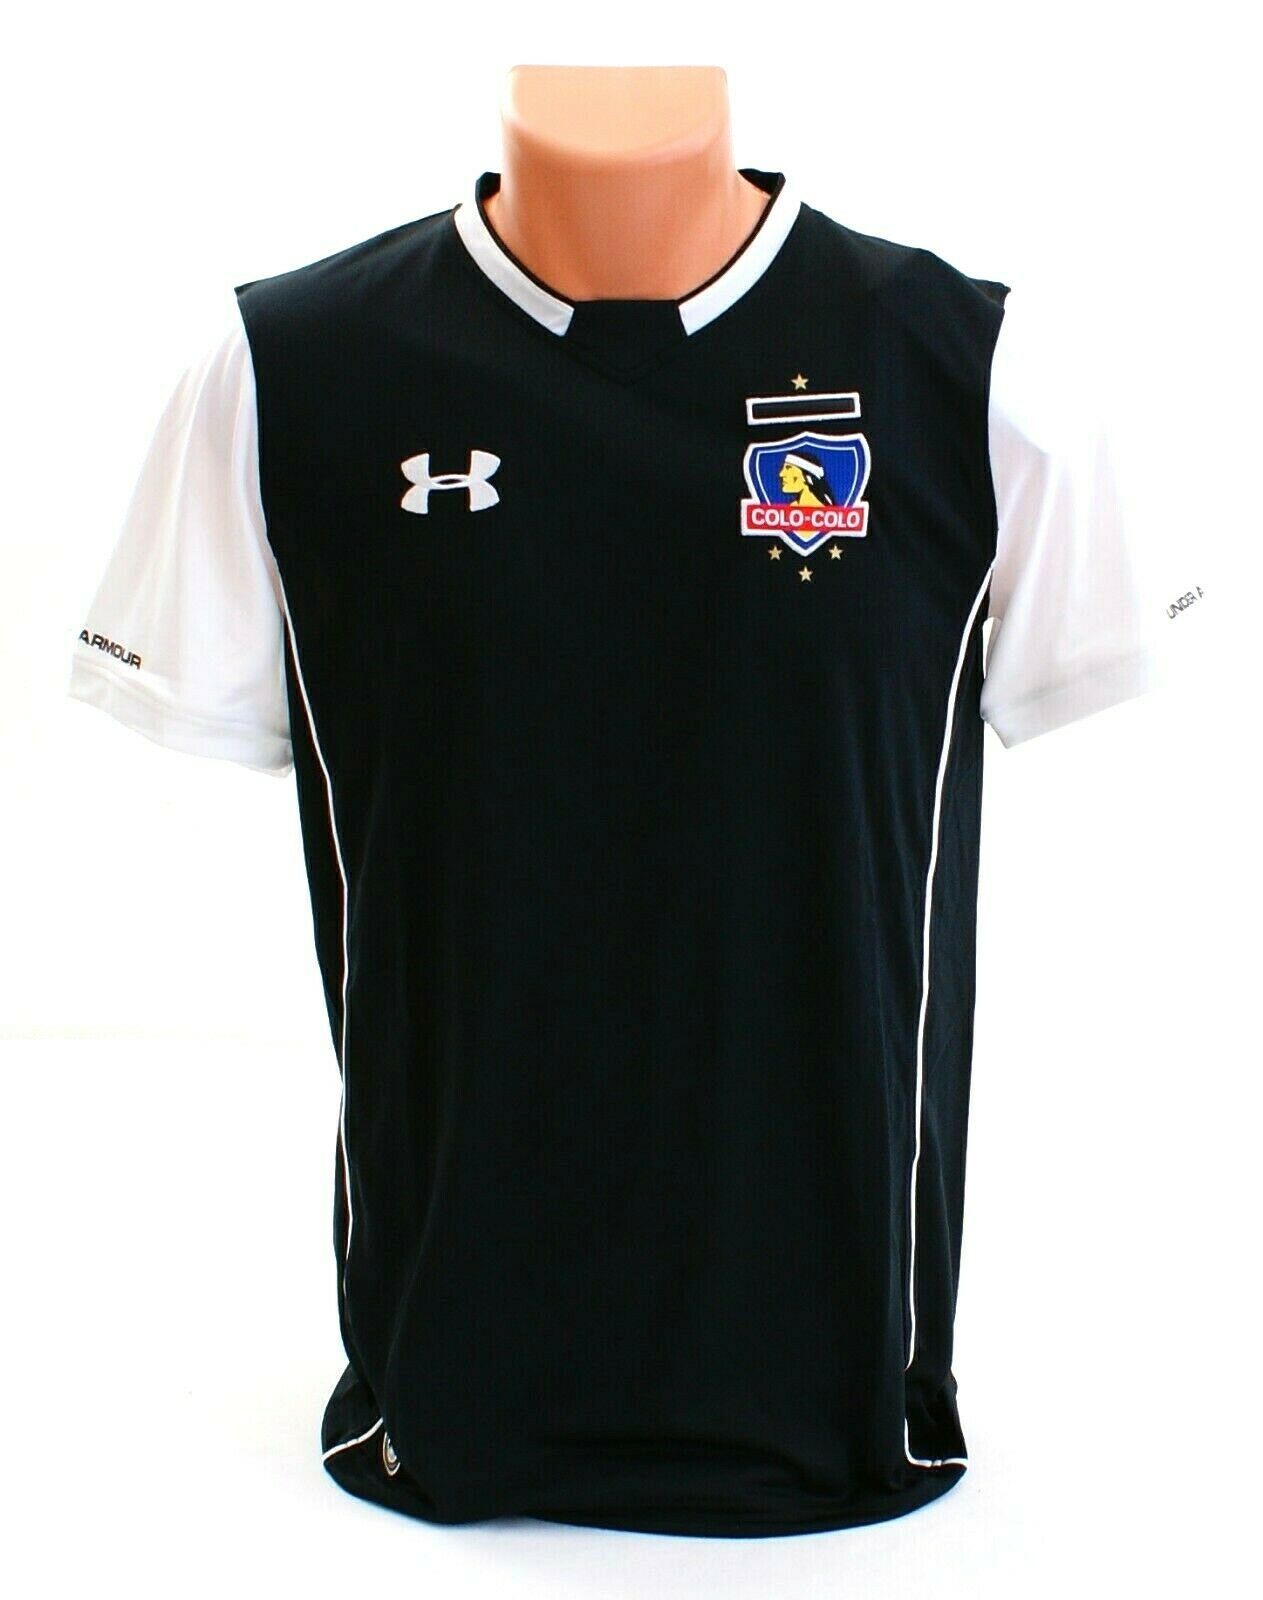 Primary image for Under Armour Colo Colo Chilean Football Club Short Sleeve Jersey Youth Boy's NWT